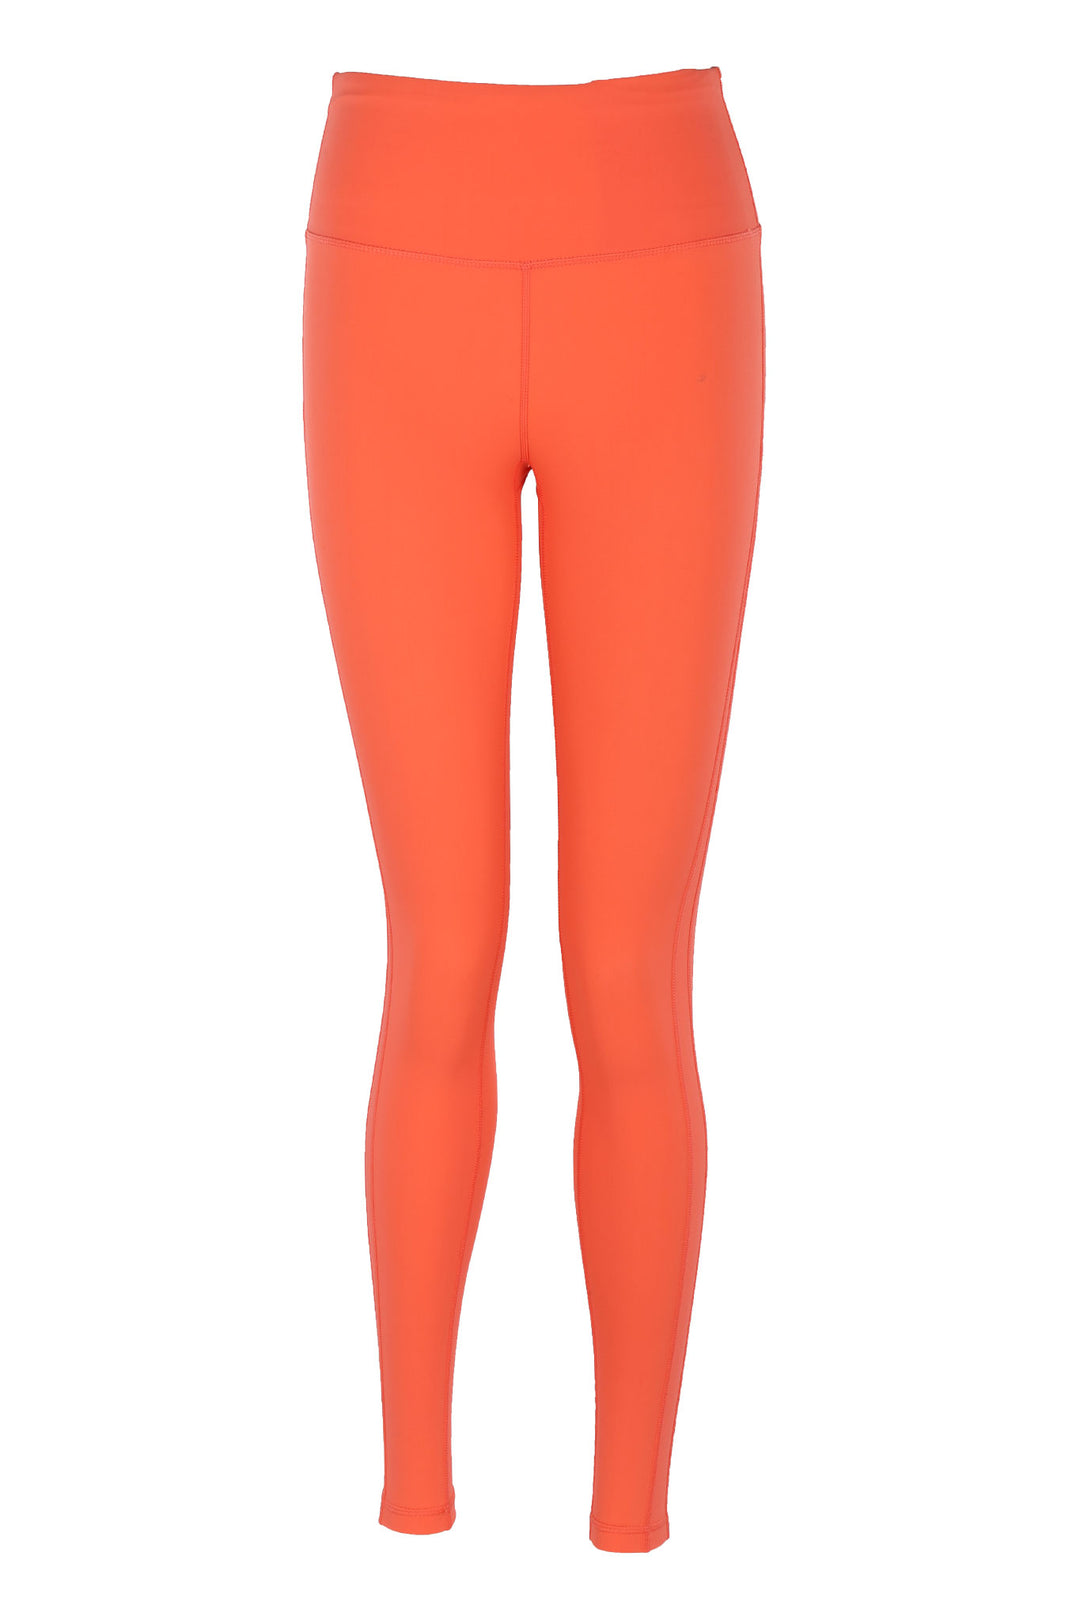 Women's Leggings and Workout Leggings | TITIKA Active Couture™ – Page 2